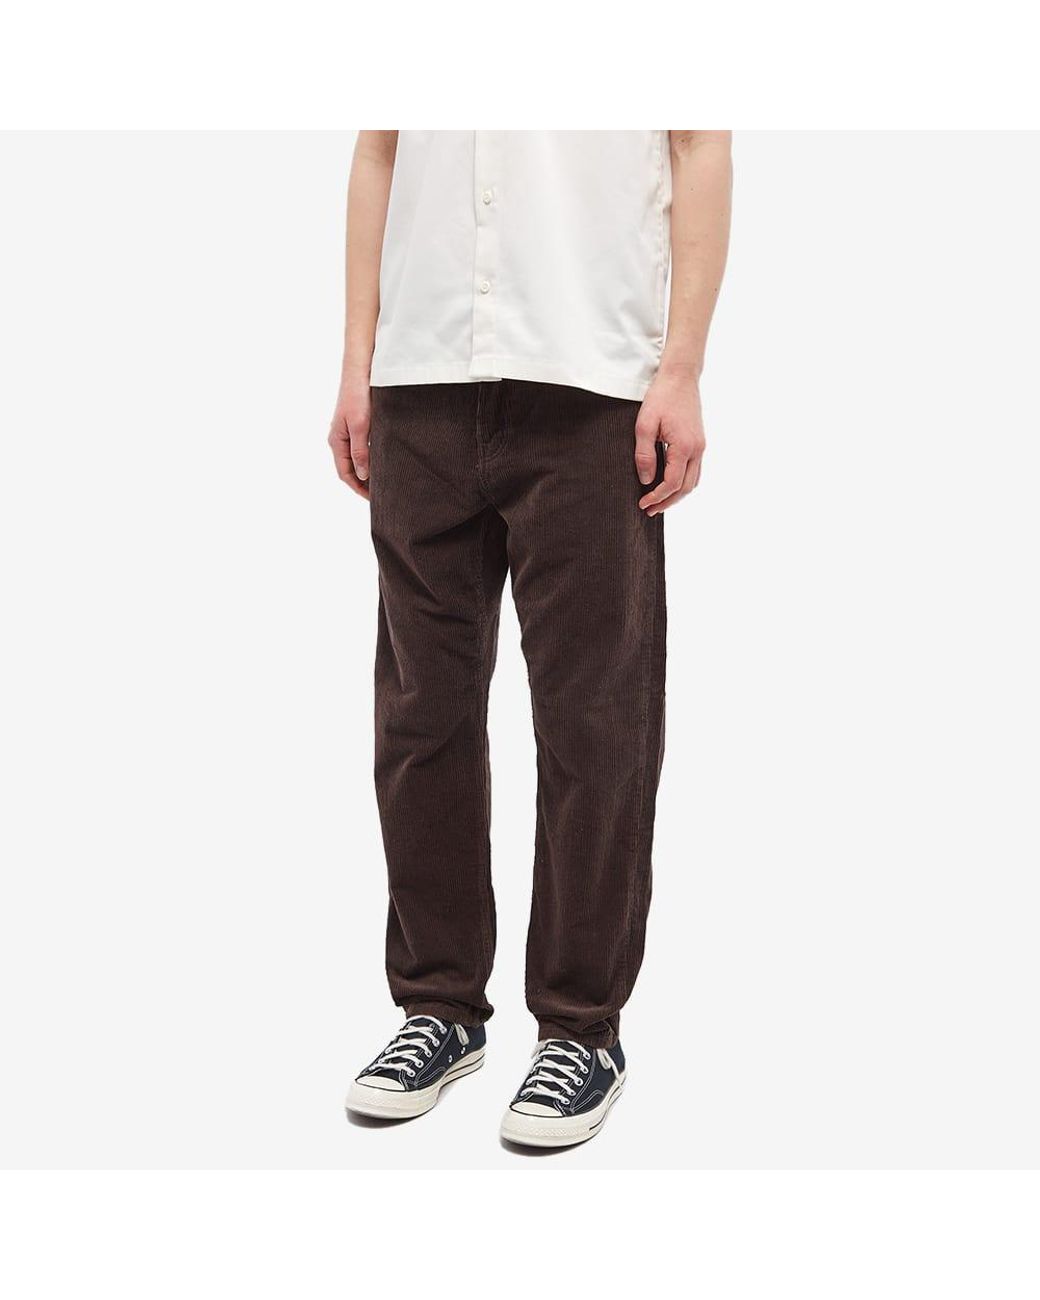 Mens newel Pant Corduroy Pants by Carhartt Wip  Coltorti Boutique